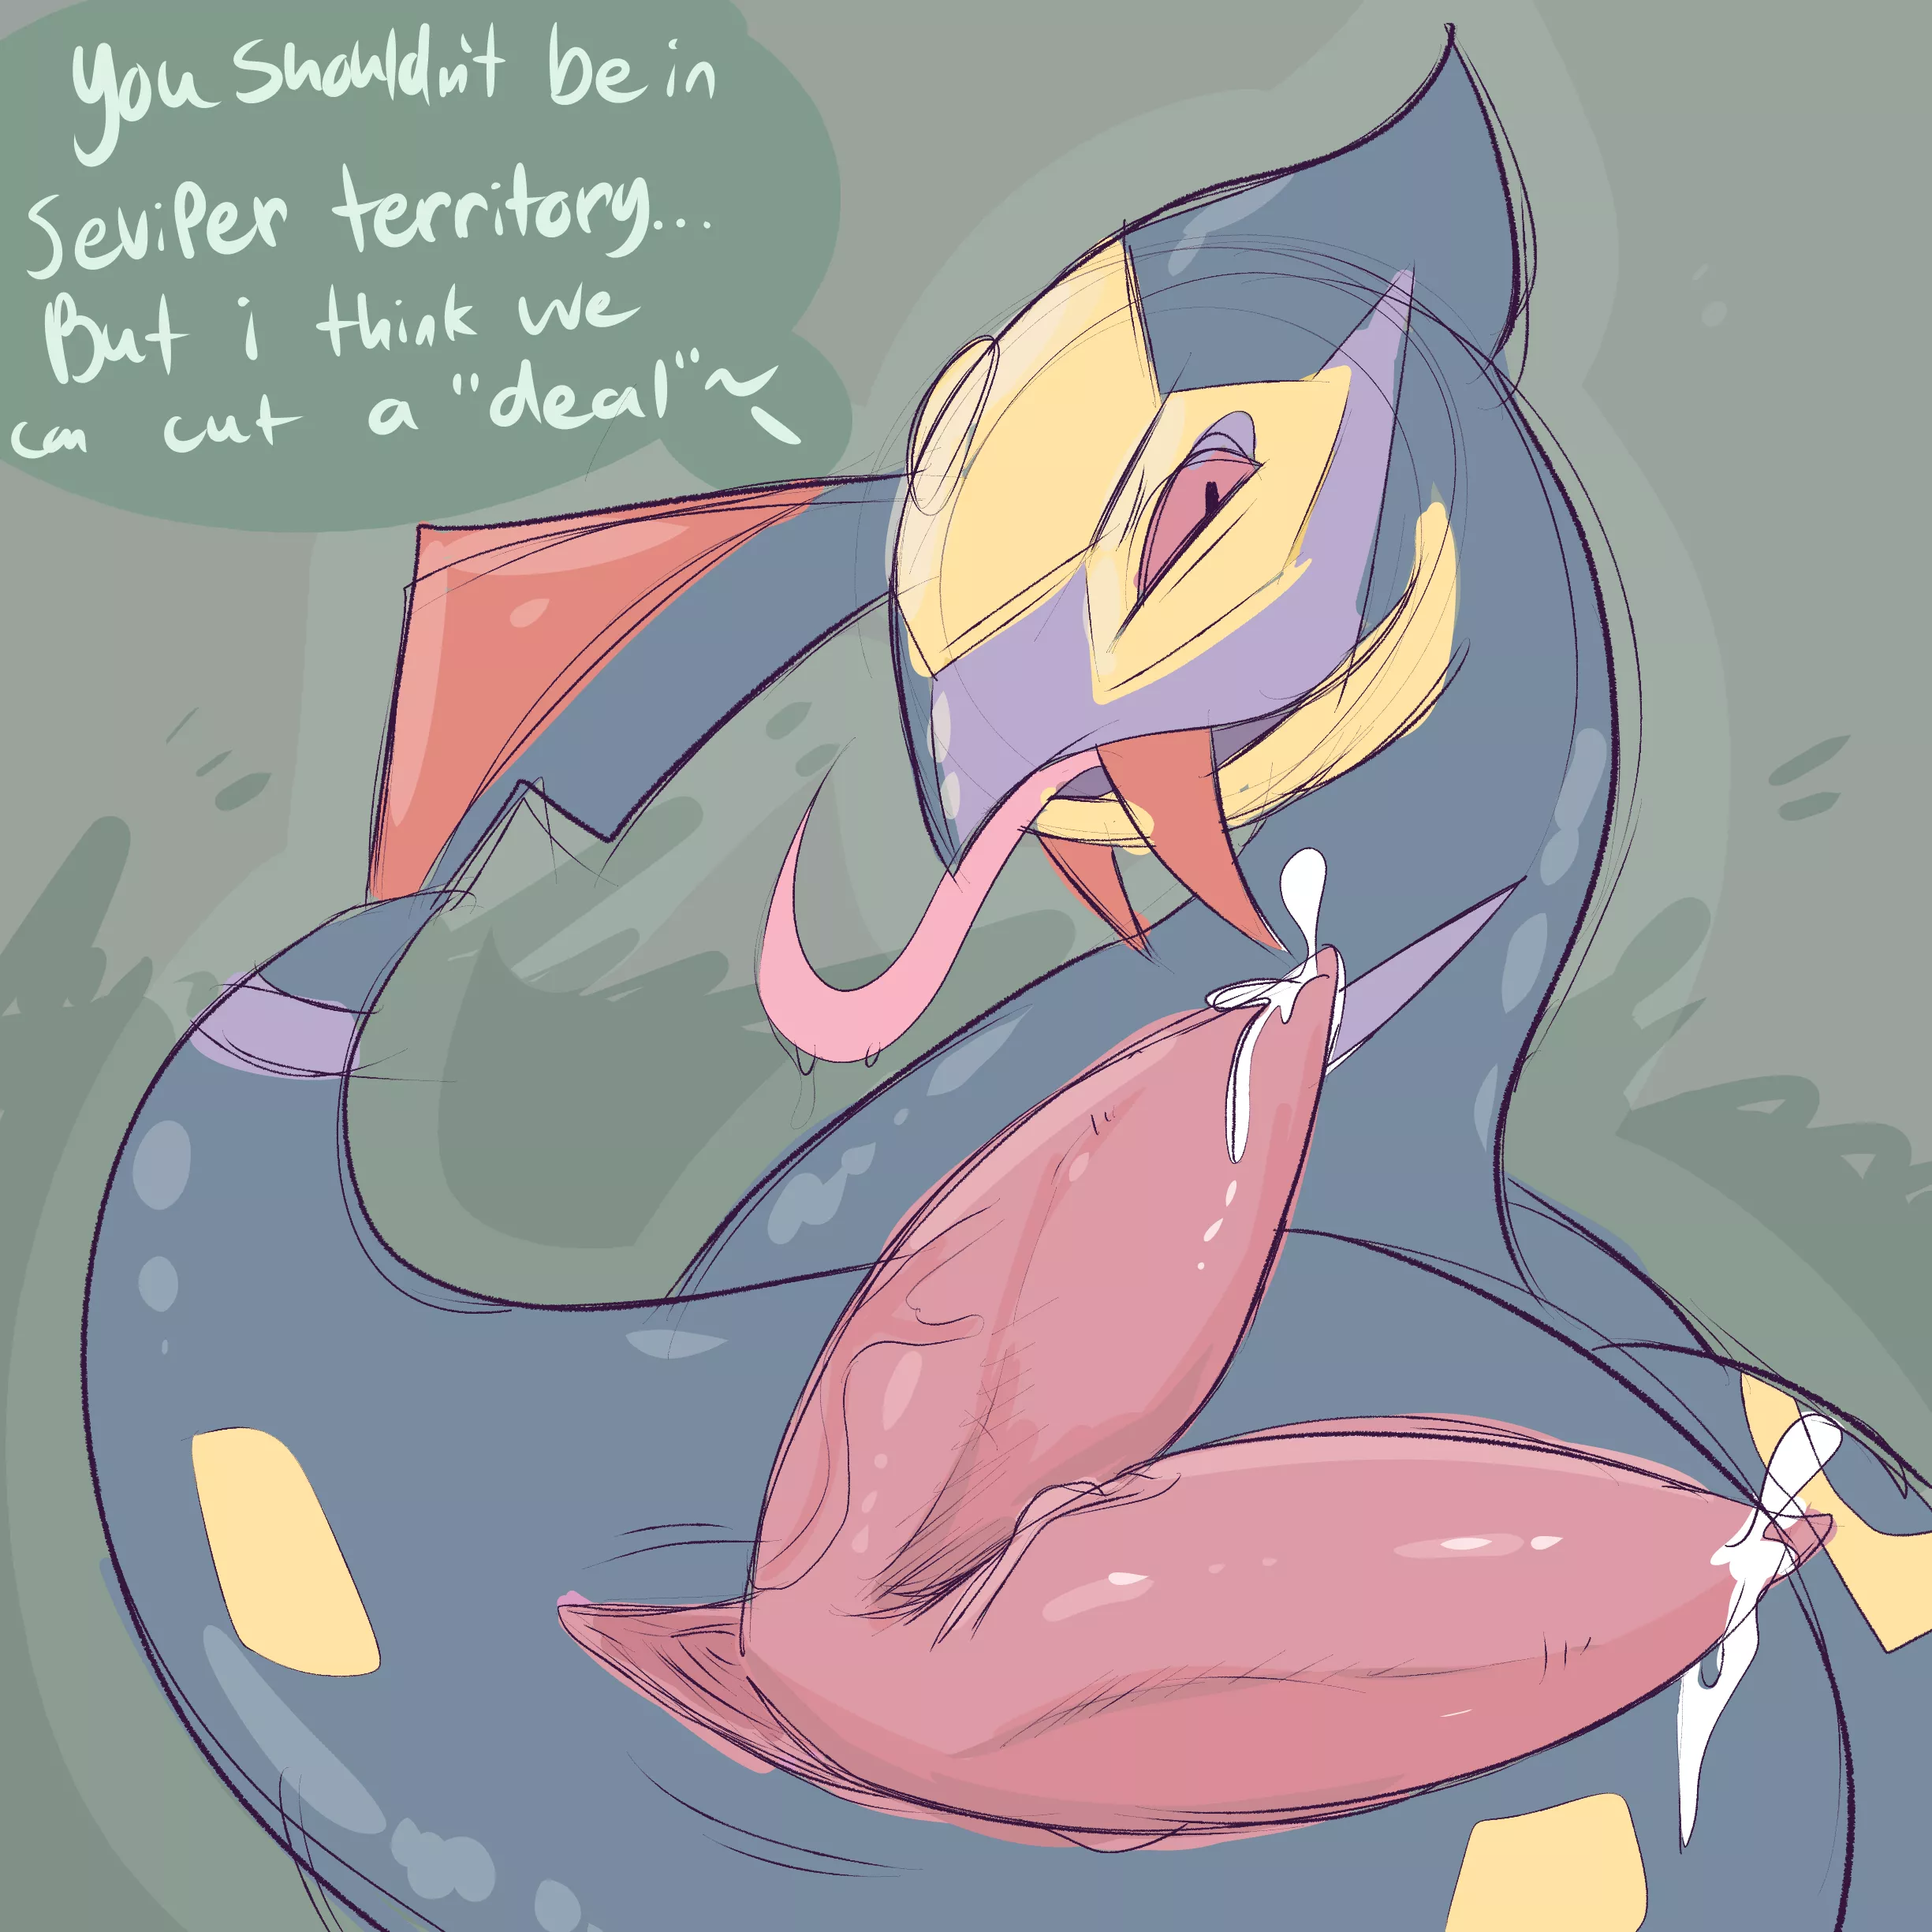 Seviper Territory [spicykiwi] nudes by DL2828